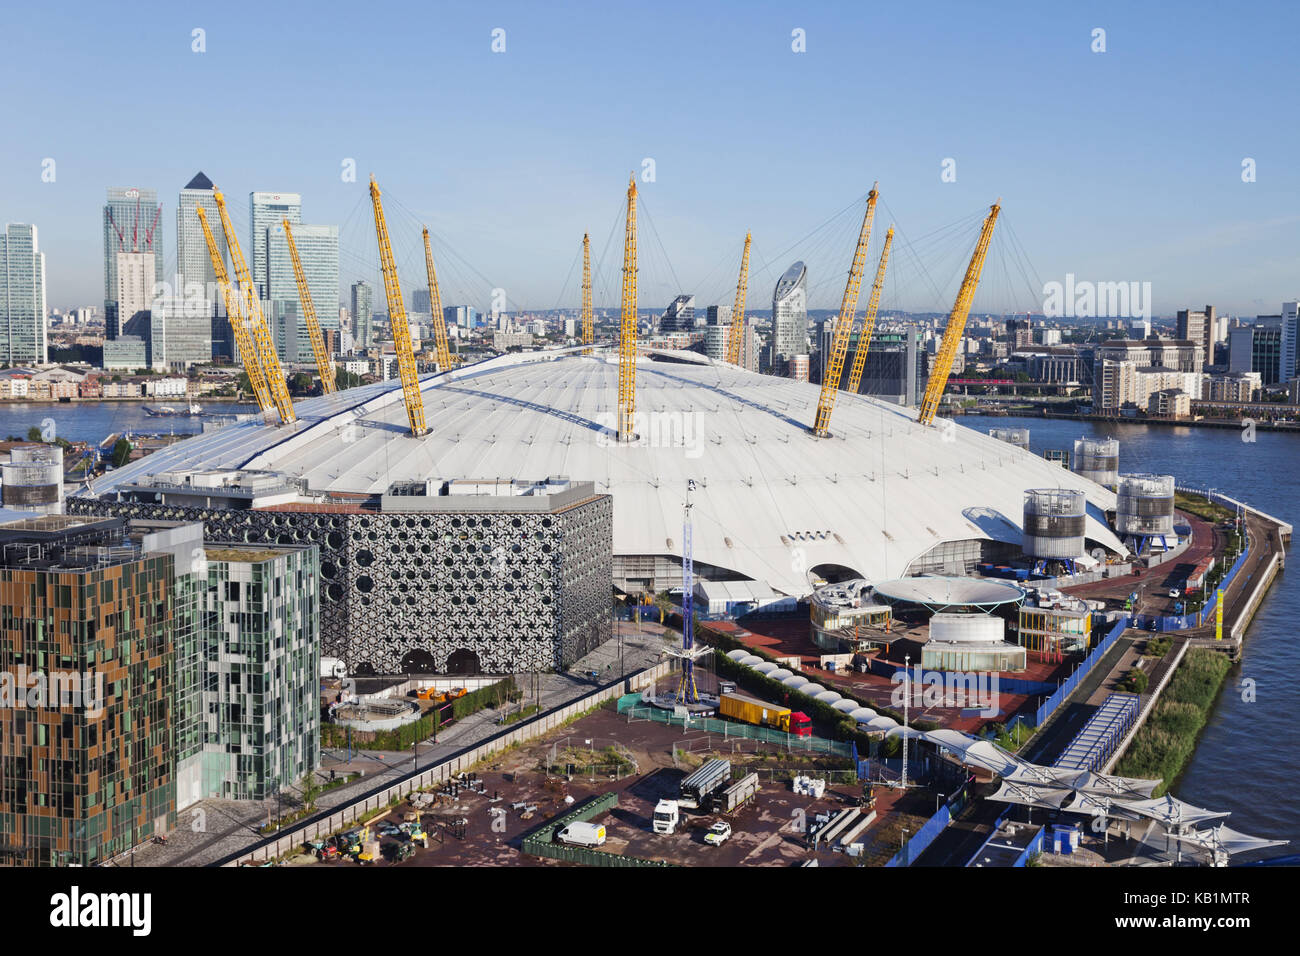 England, London, O2 arena, overview, dock country, skyline, Stock Photo